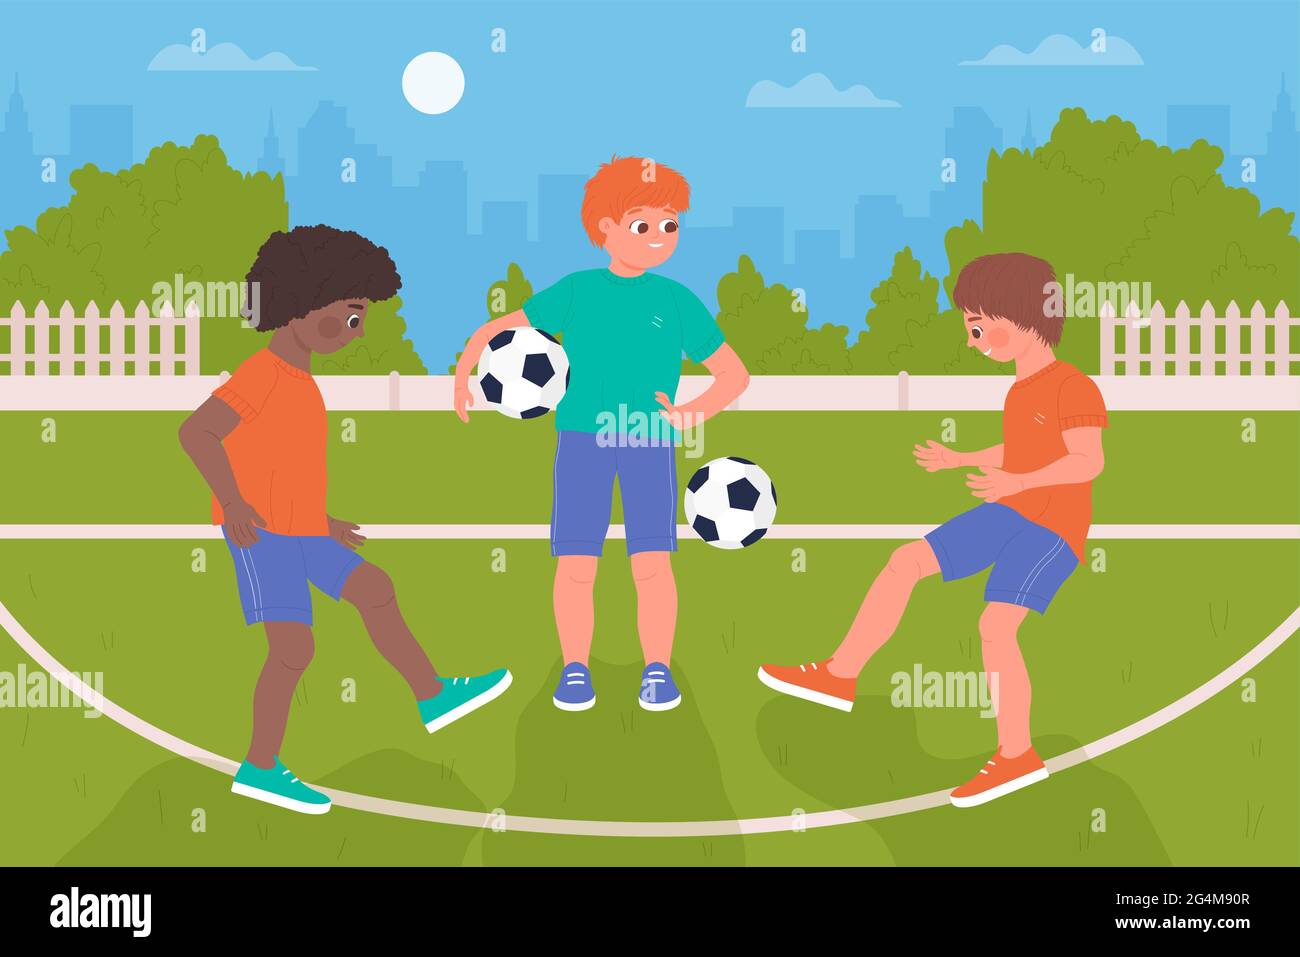 Kids play ball, soccer healthy sport activity vector illustration. Cartoon happy player characters have fun, funny boys children playing football together on sports field in schoolyard background Stock Vector